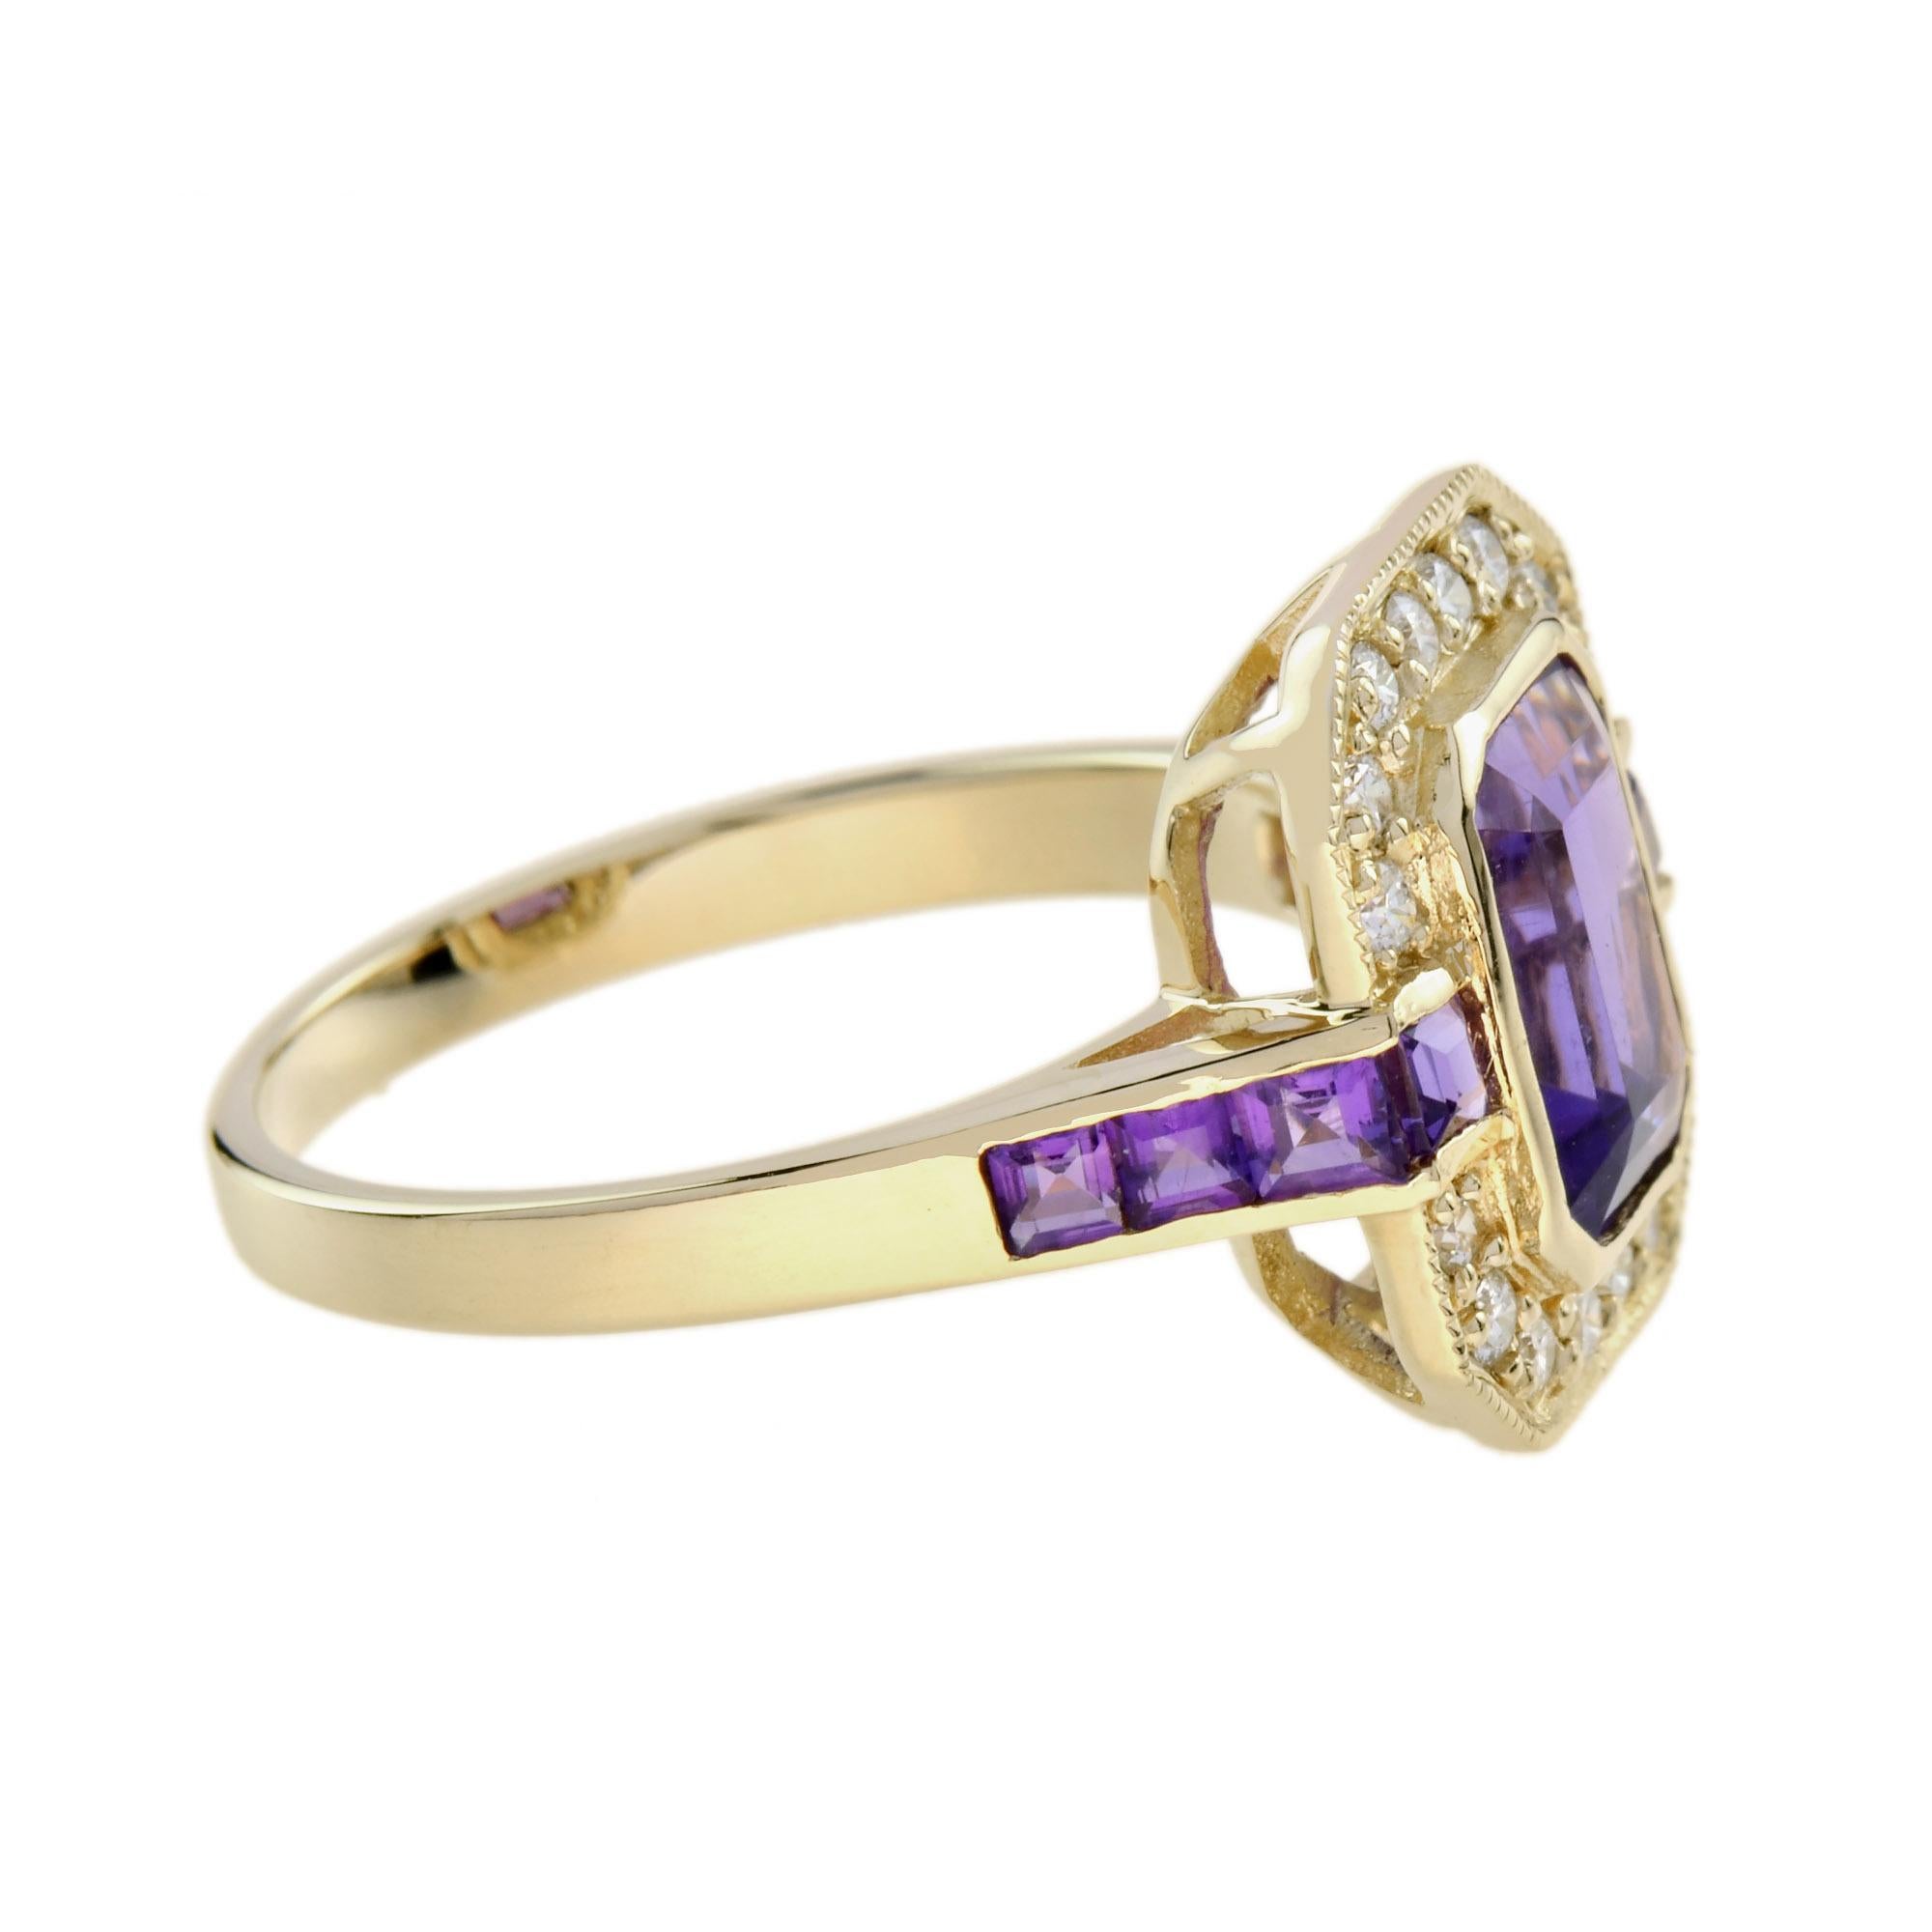 Women's Emerald Cut Amethyst and Diamond Art Deco Style Halo Ring in 9K Yellow Gold